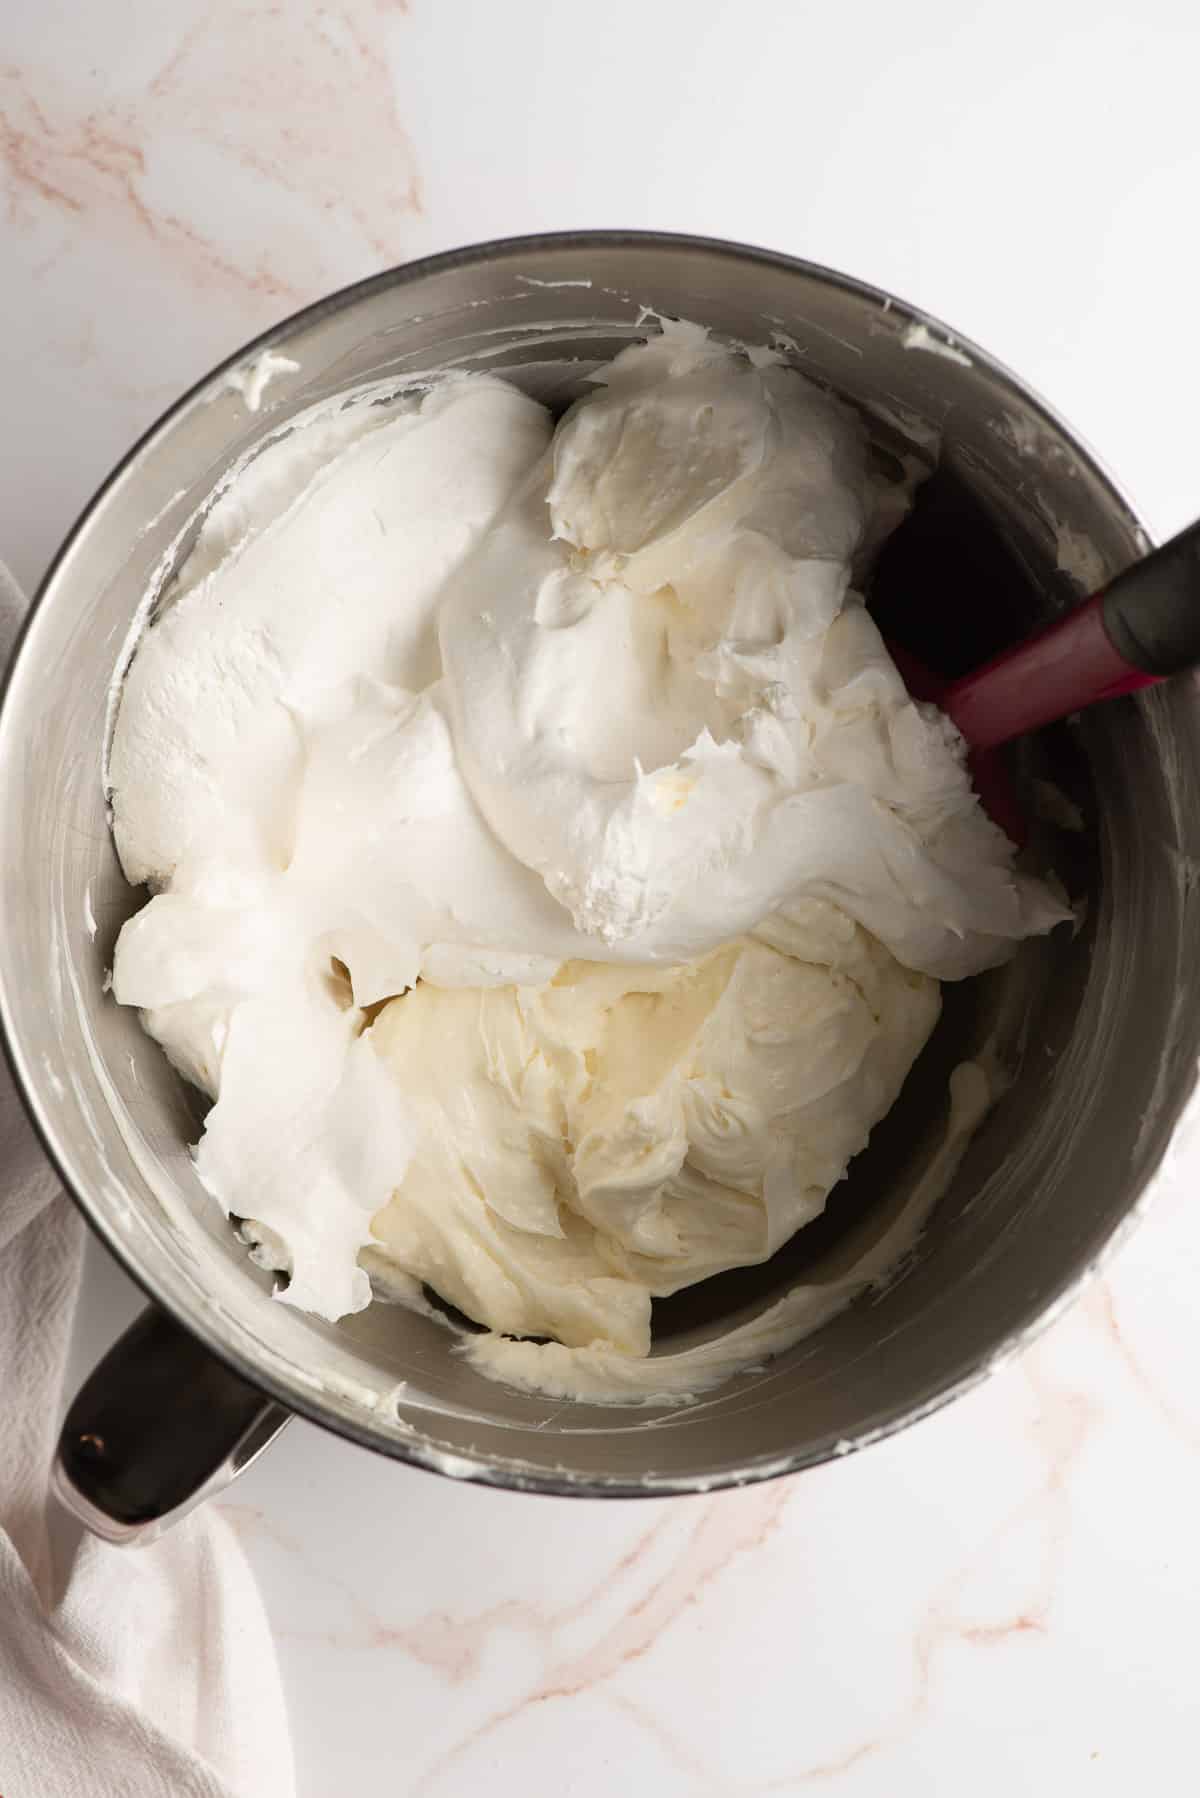 Cream cheese, sugar, and whipped topping in a mixing bowl.